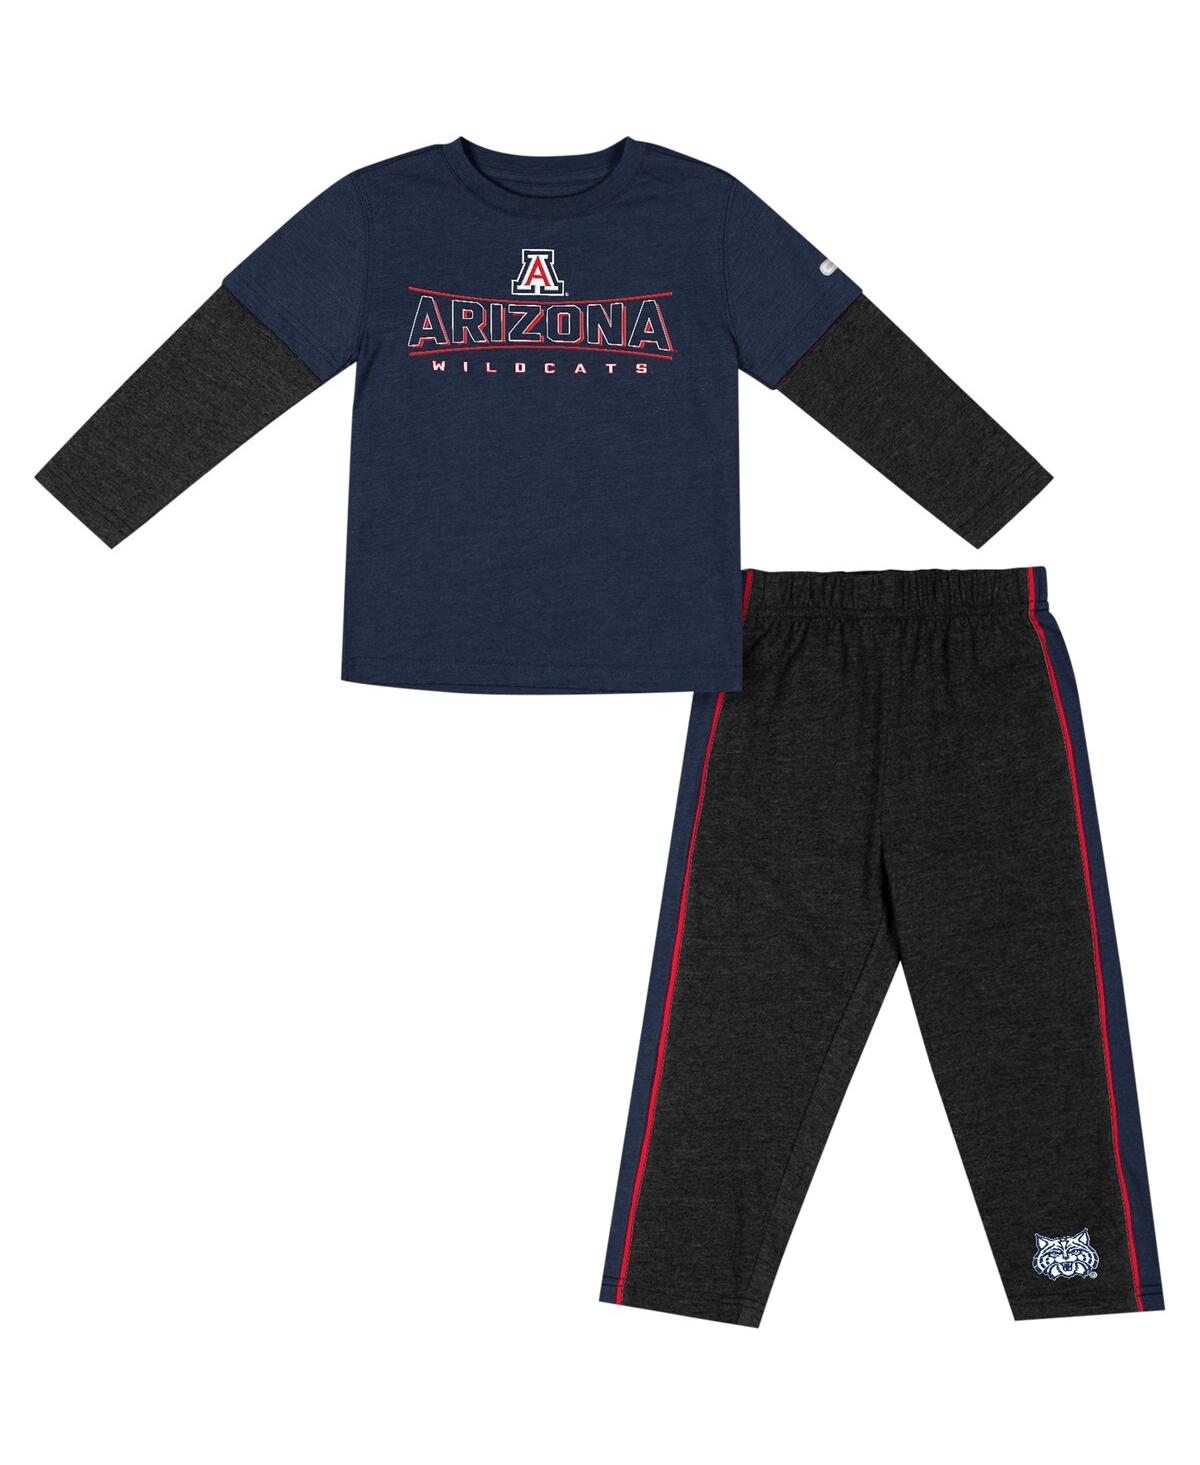 Colosseum Babies' Toddler Boys And Girls  Navy, Black Arizona Wildcats Long Sleeve T-shirt And Pants Set In Navy,black